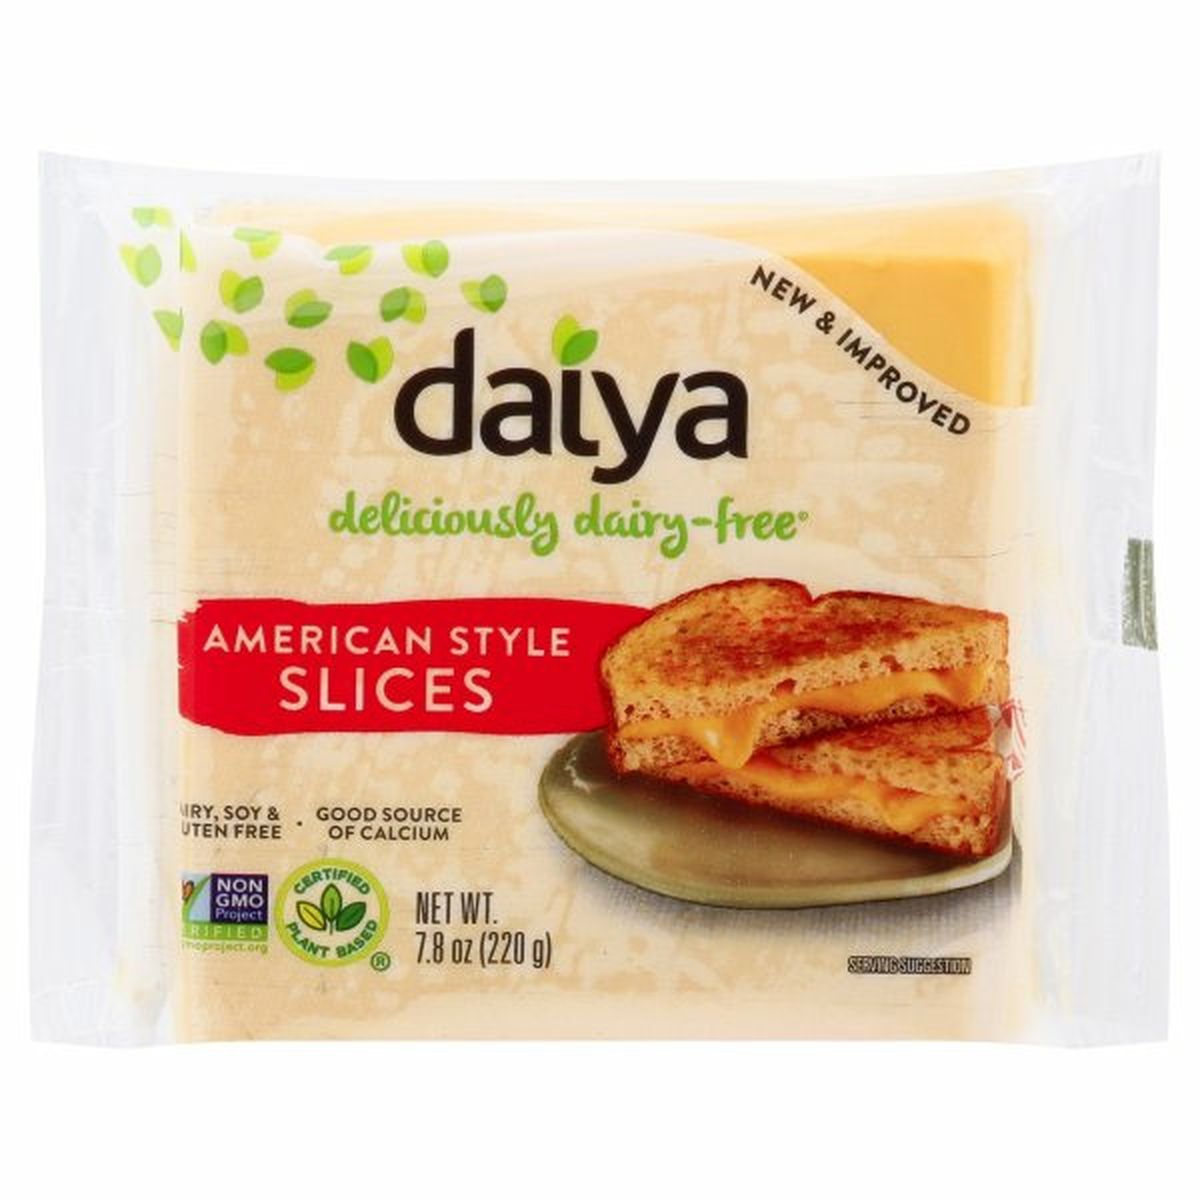 Calories in Daiya Cheeze Slices, American Style